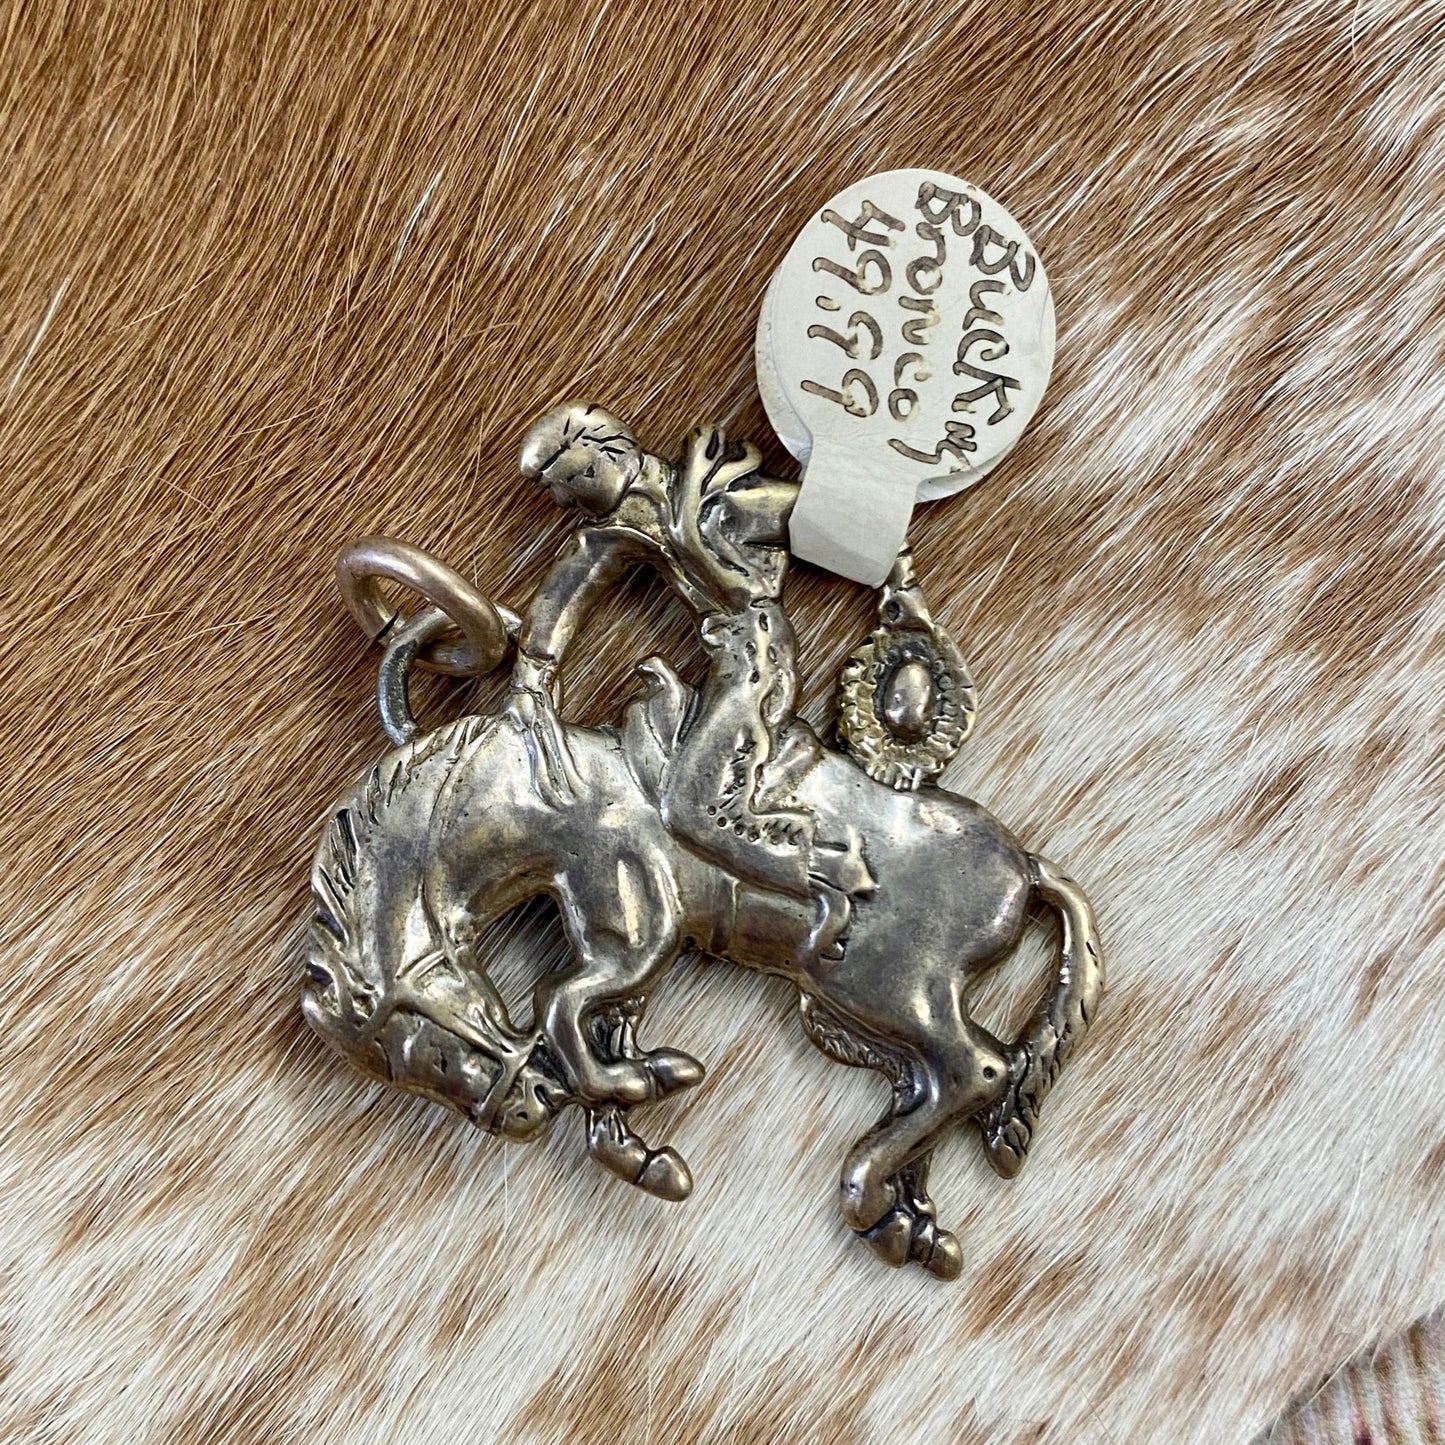 Bucking bronco cowboy sterling silver pendant/charm. The perfect addition to anyone's jewelry collection. This piece is stamped, please see photos below for hallmark. This pendant is so fun and unique. It would make for a beautiful addition to your next outfit or gift it to a loved one!   Size: 1.25” Inches length   Signed: Yes